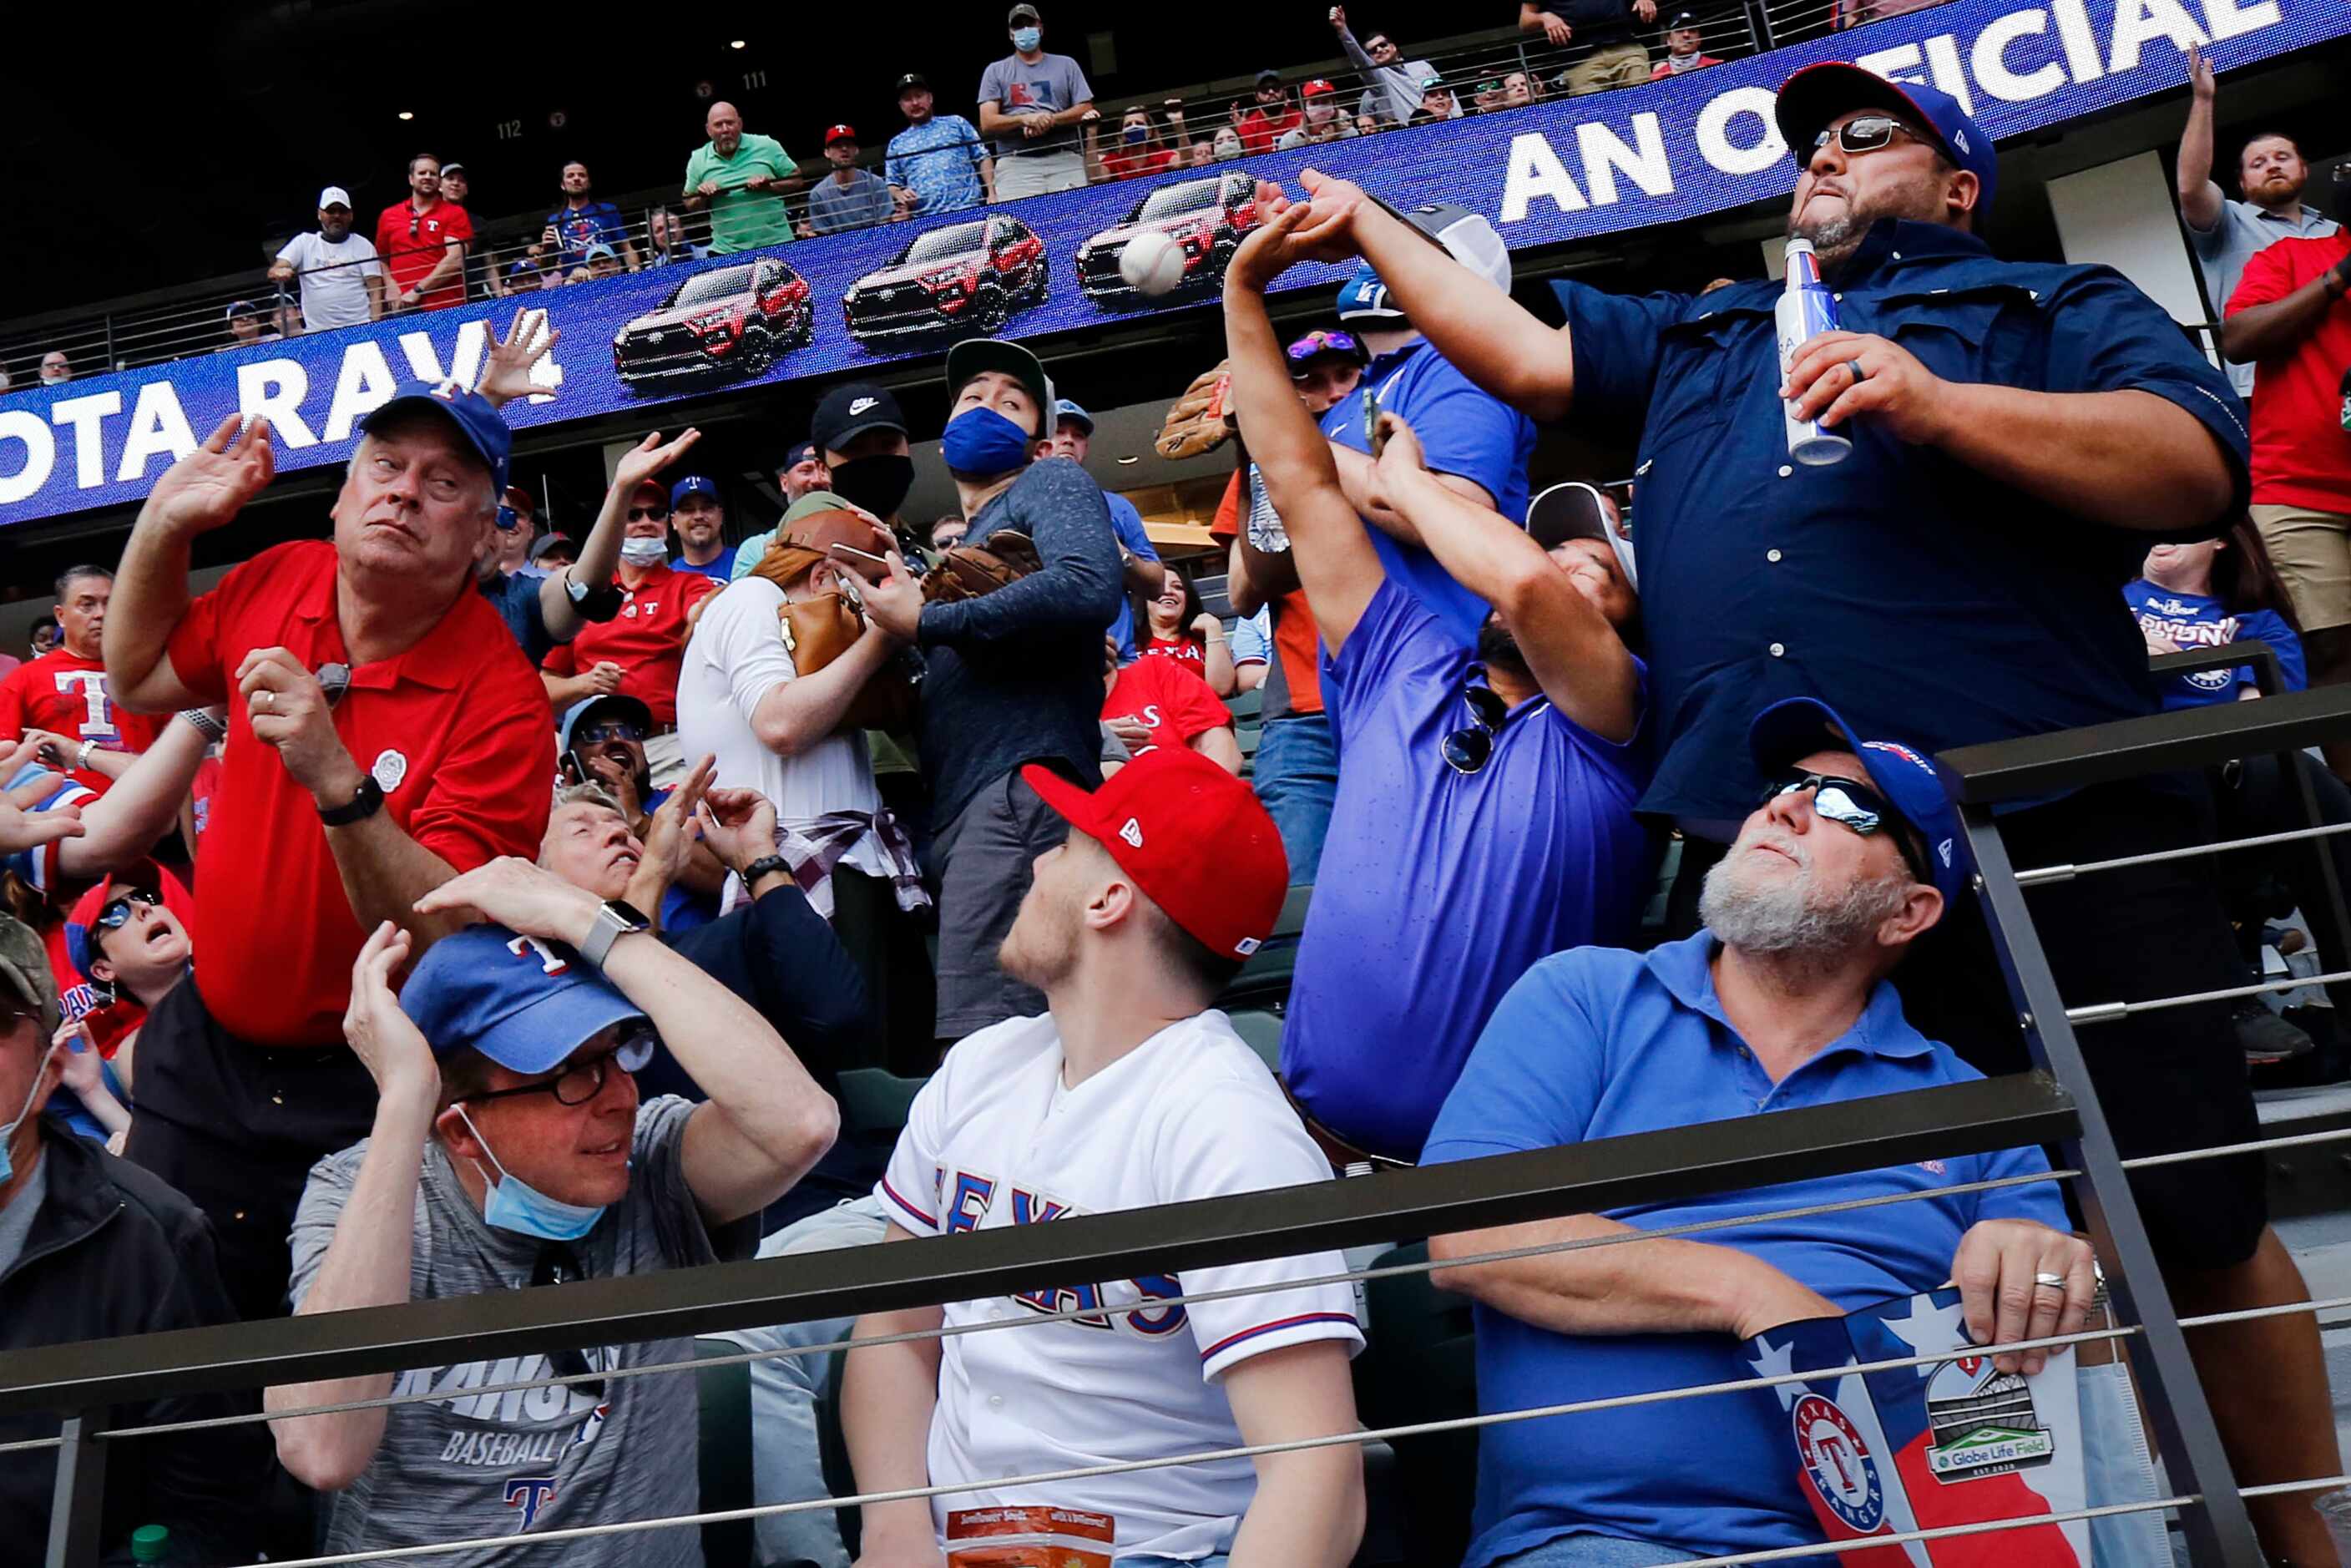 Texas Rangers fans Adam Ramirez (right) and Tommy Munoz (second from right) try to catch a...